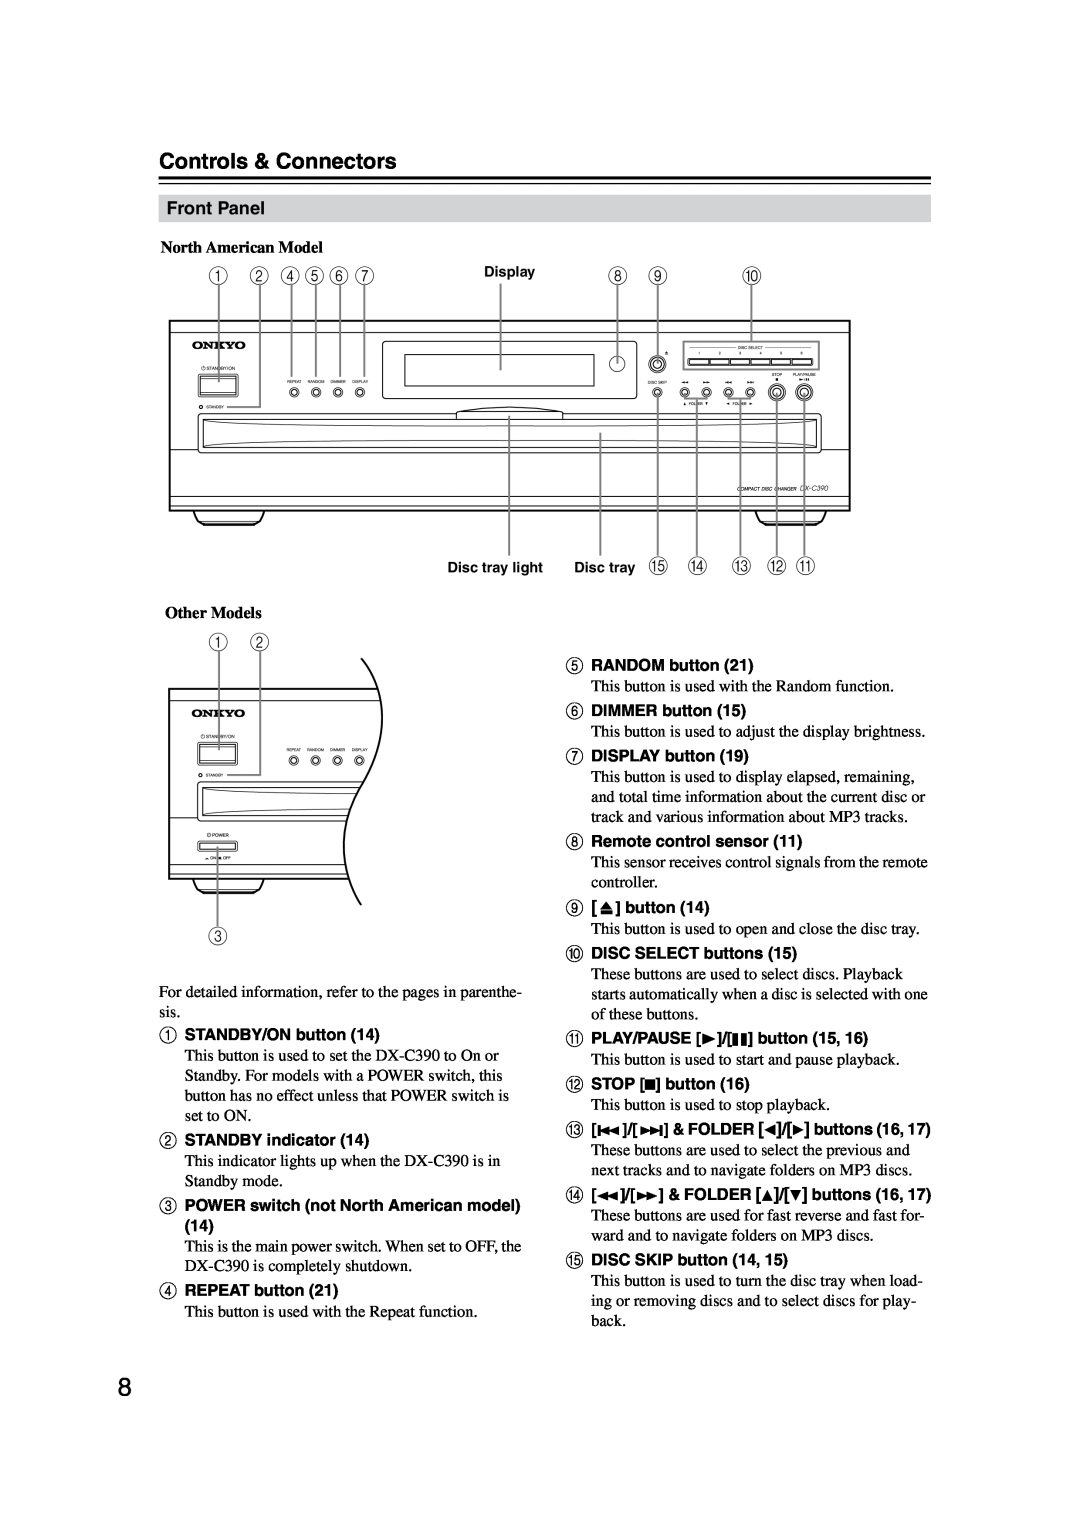 Onkyo DX-C390 instruction manual Controls & Connectors, M L K, Front Panel, North American Model, Other Models, controller 